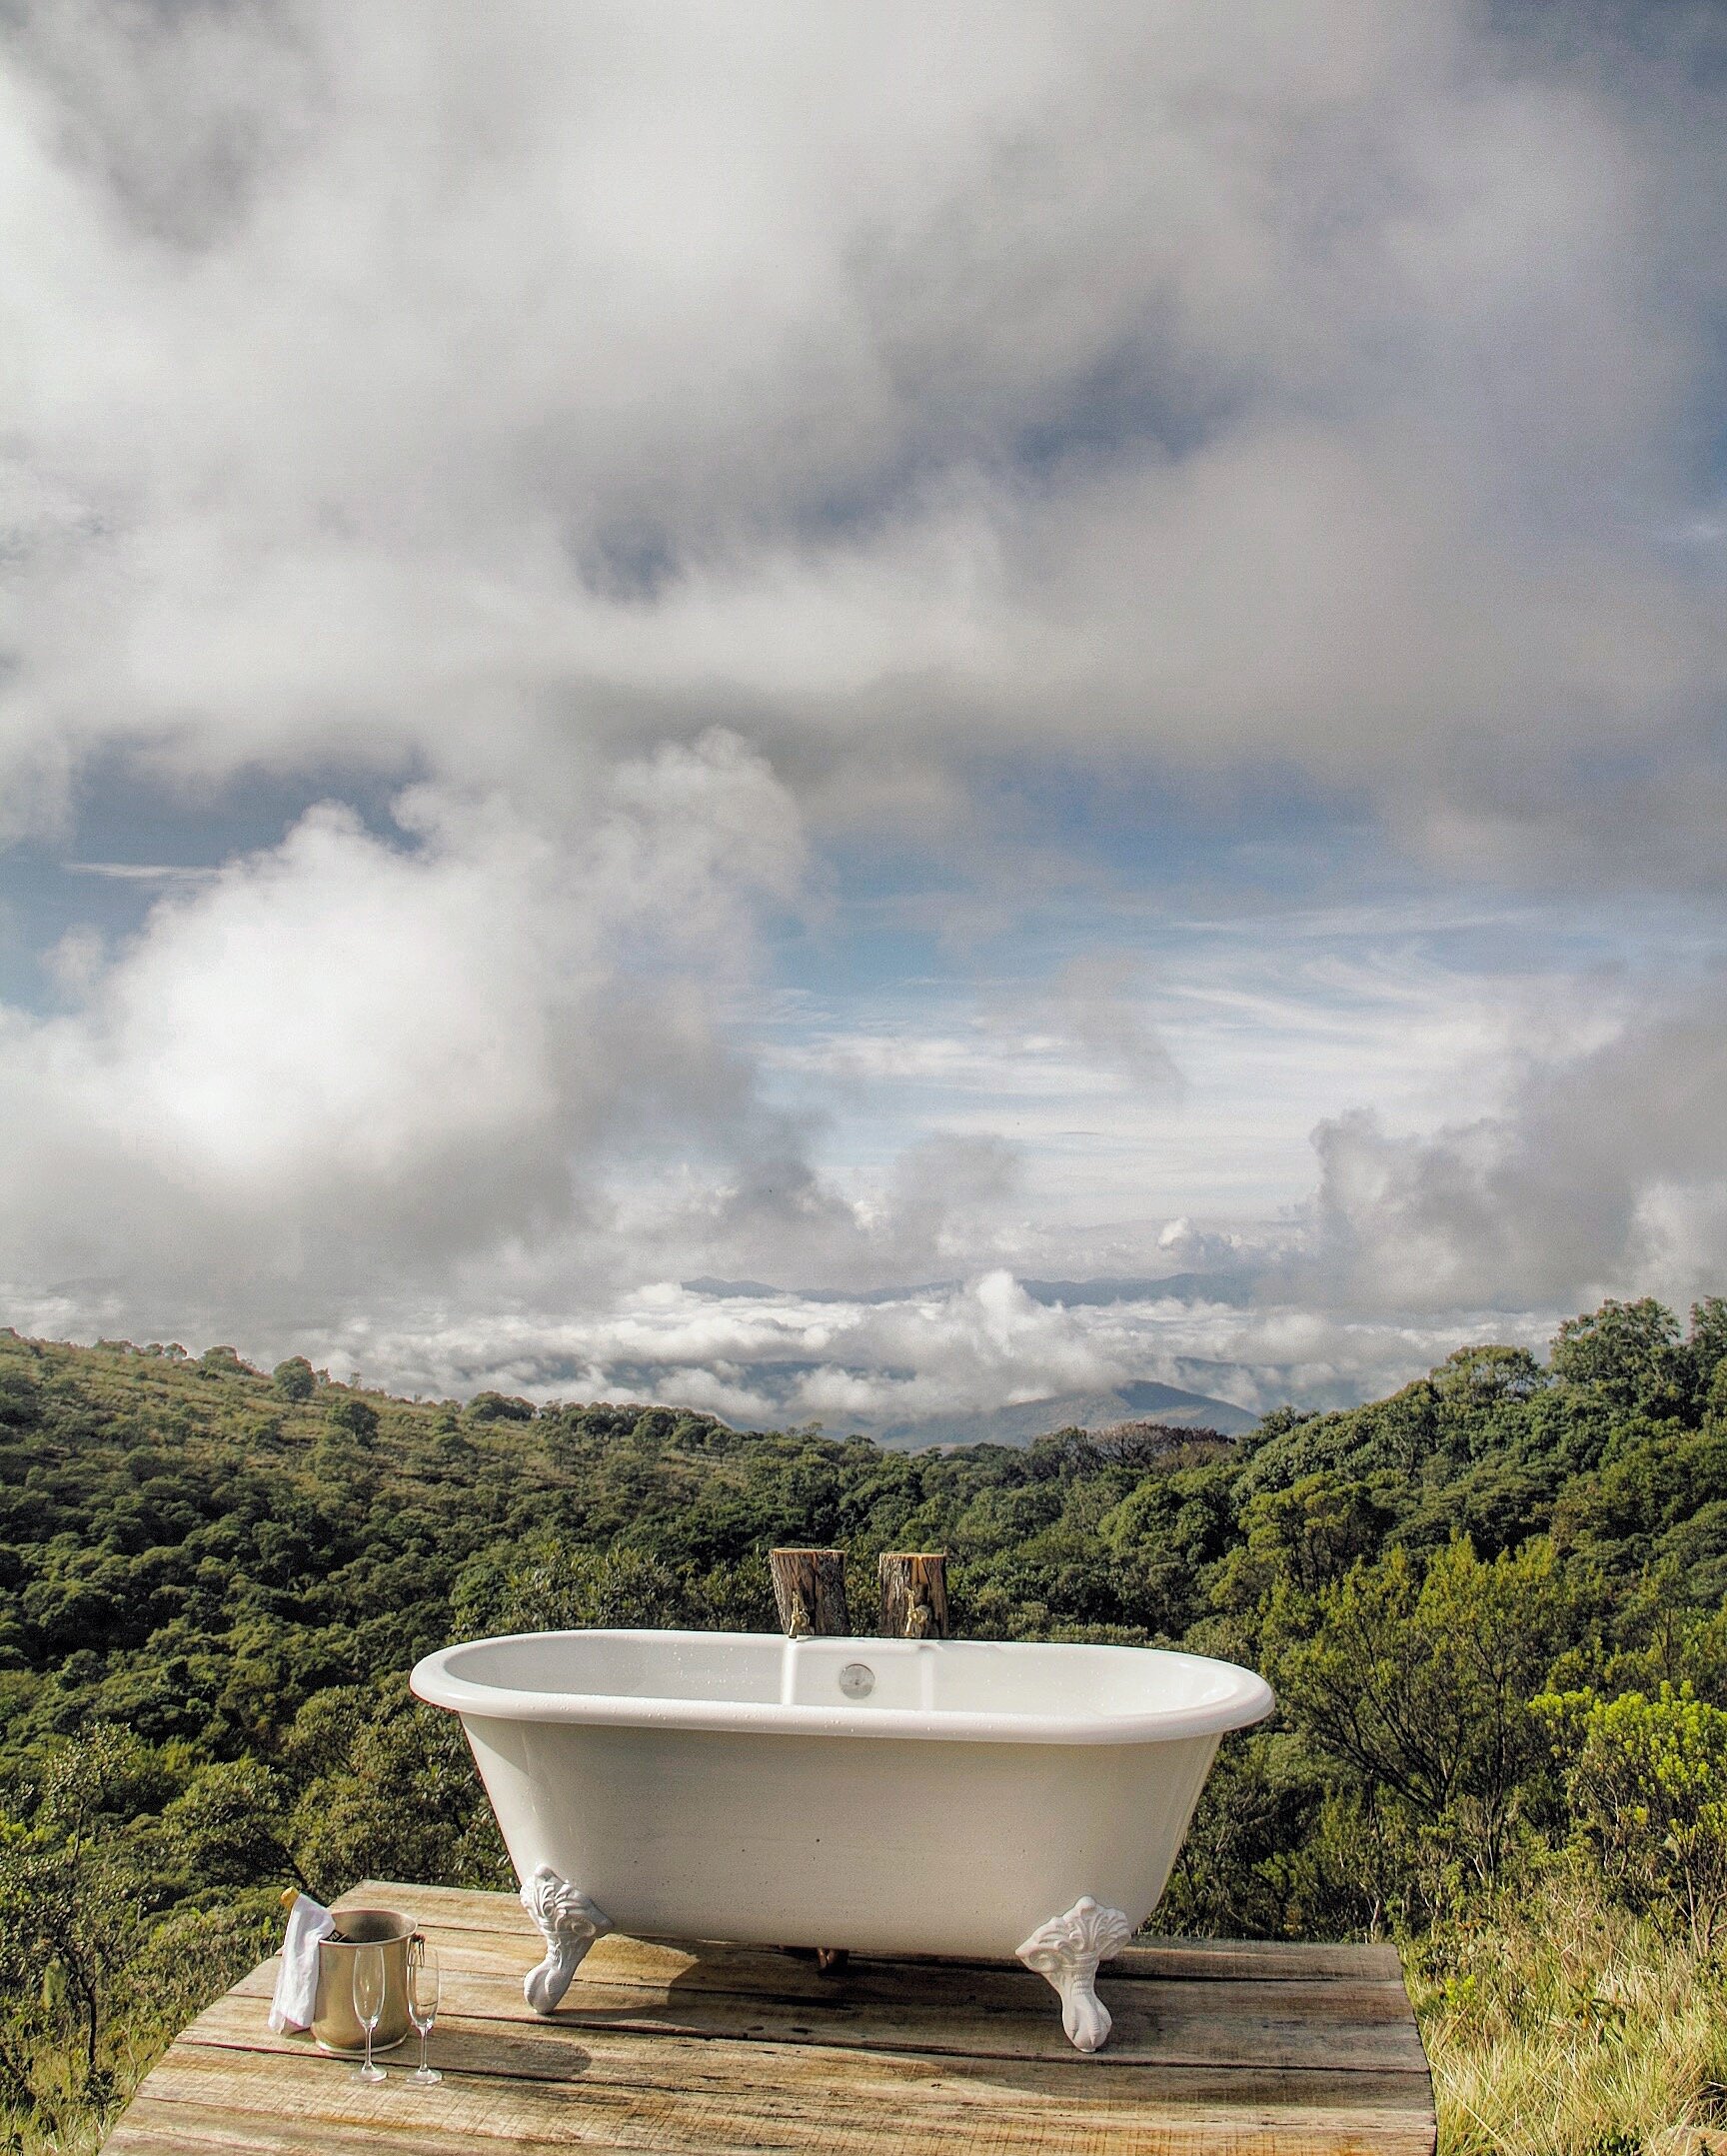 The Outdoor Bathtub at the Eagles Nest